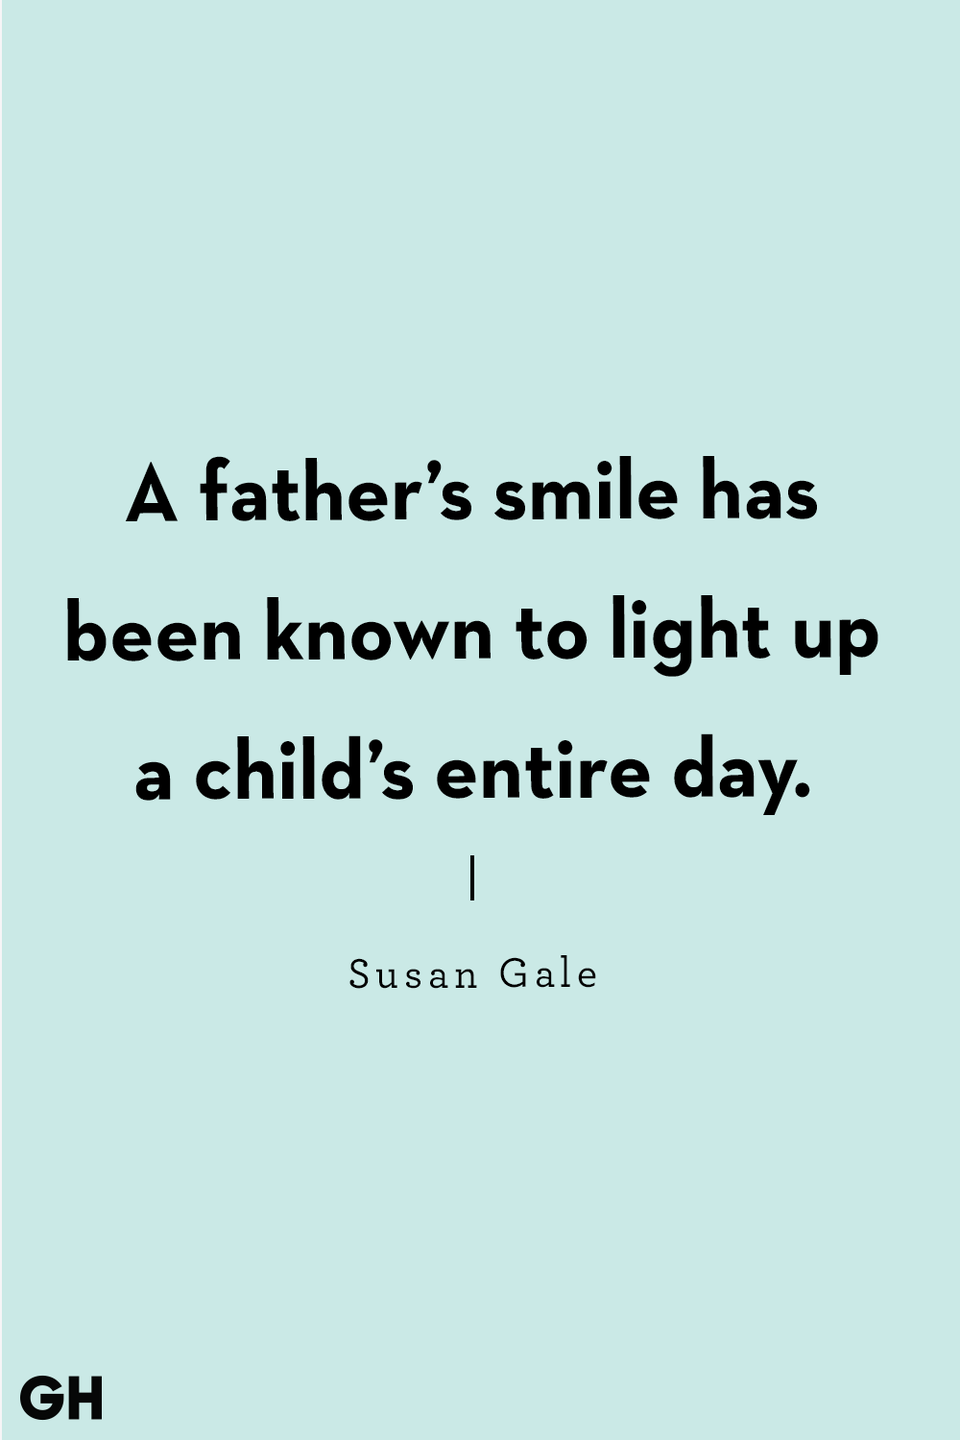 <p>“A father’s smile has been known to light up a child’s entire day.”</p>